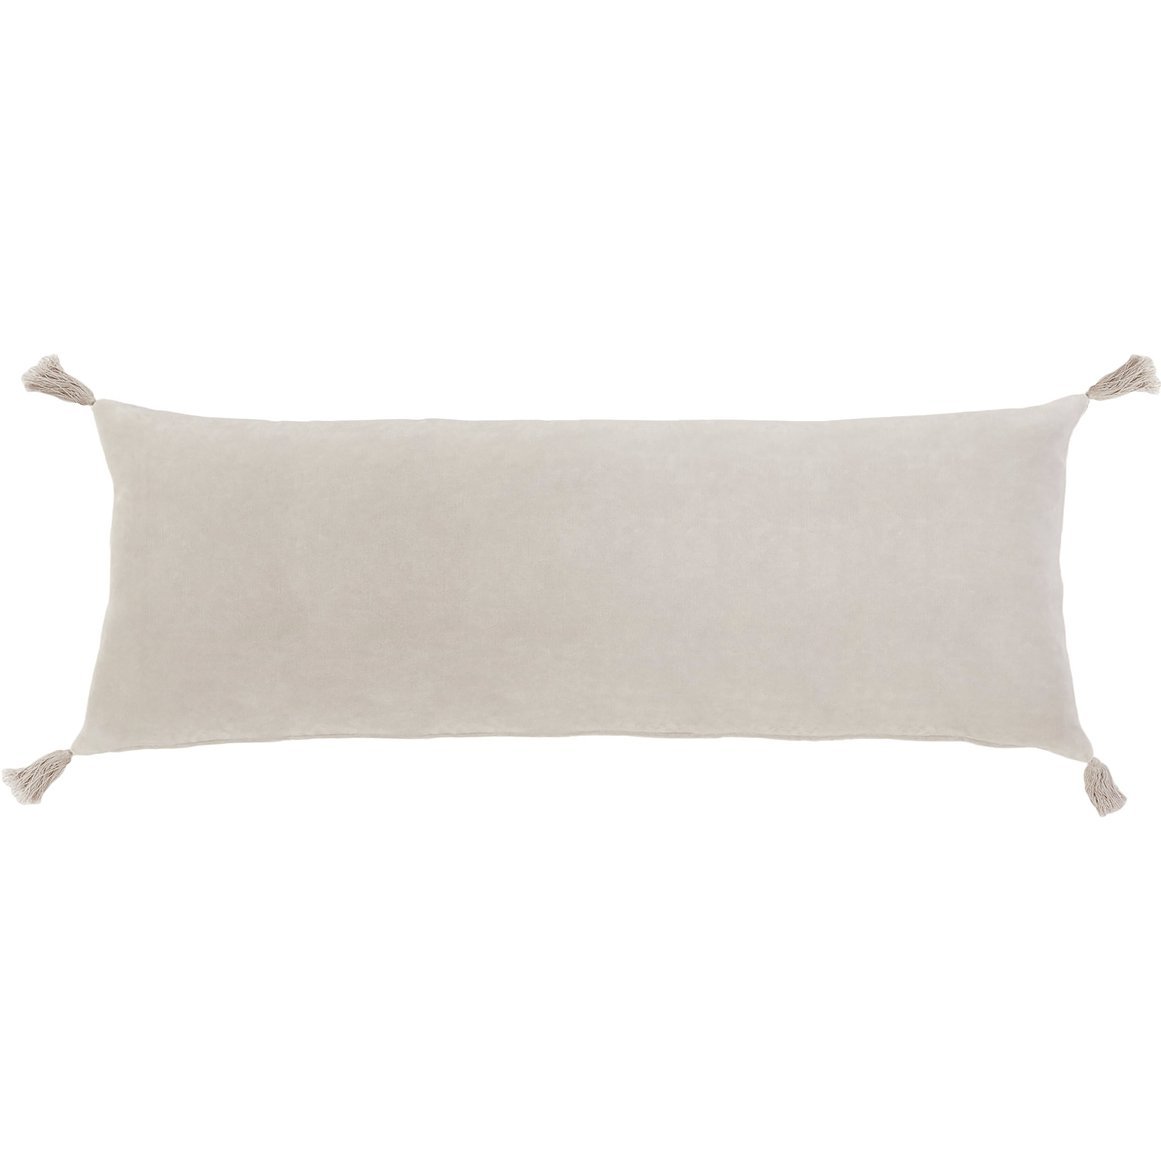 Bianca 14x40 Pillow by Pom at Home